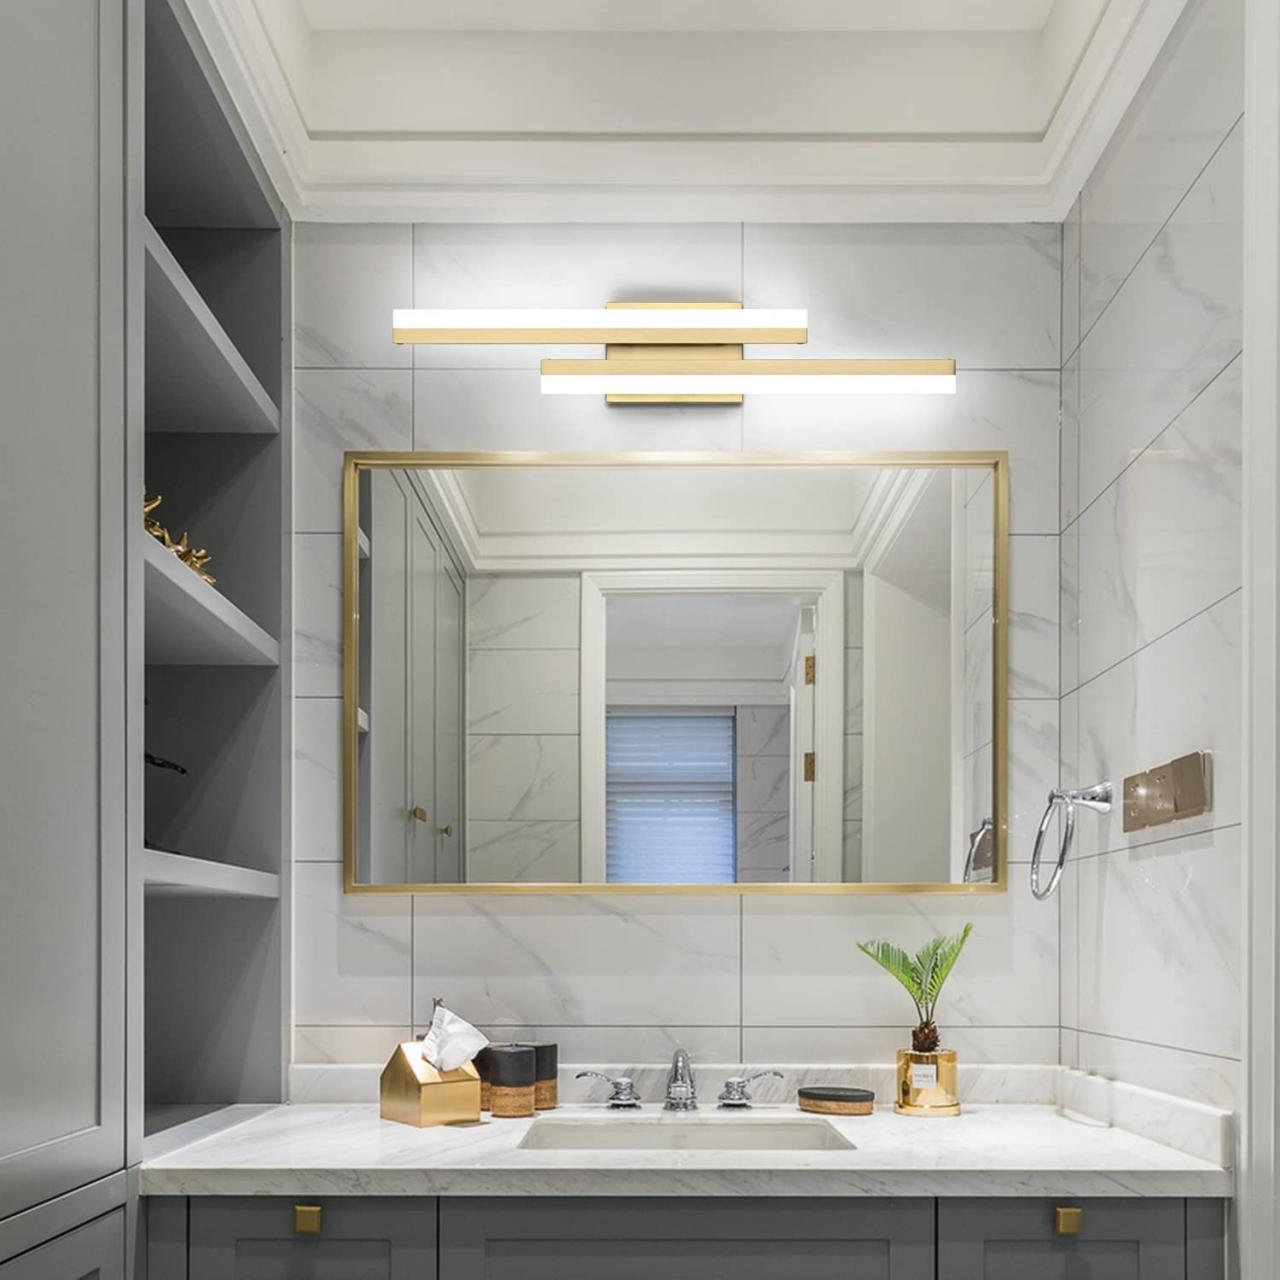 https://hgtvhome.sndimg.com/content/dam/images/hgtv/products/2023/4/19/rx_amazon_dimmable-led-vanity-light.jpeg.rend.hgtvcom.1280.1280.suffix/1681933786238.jpeg